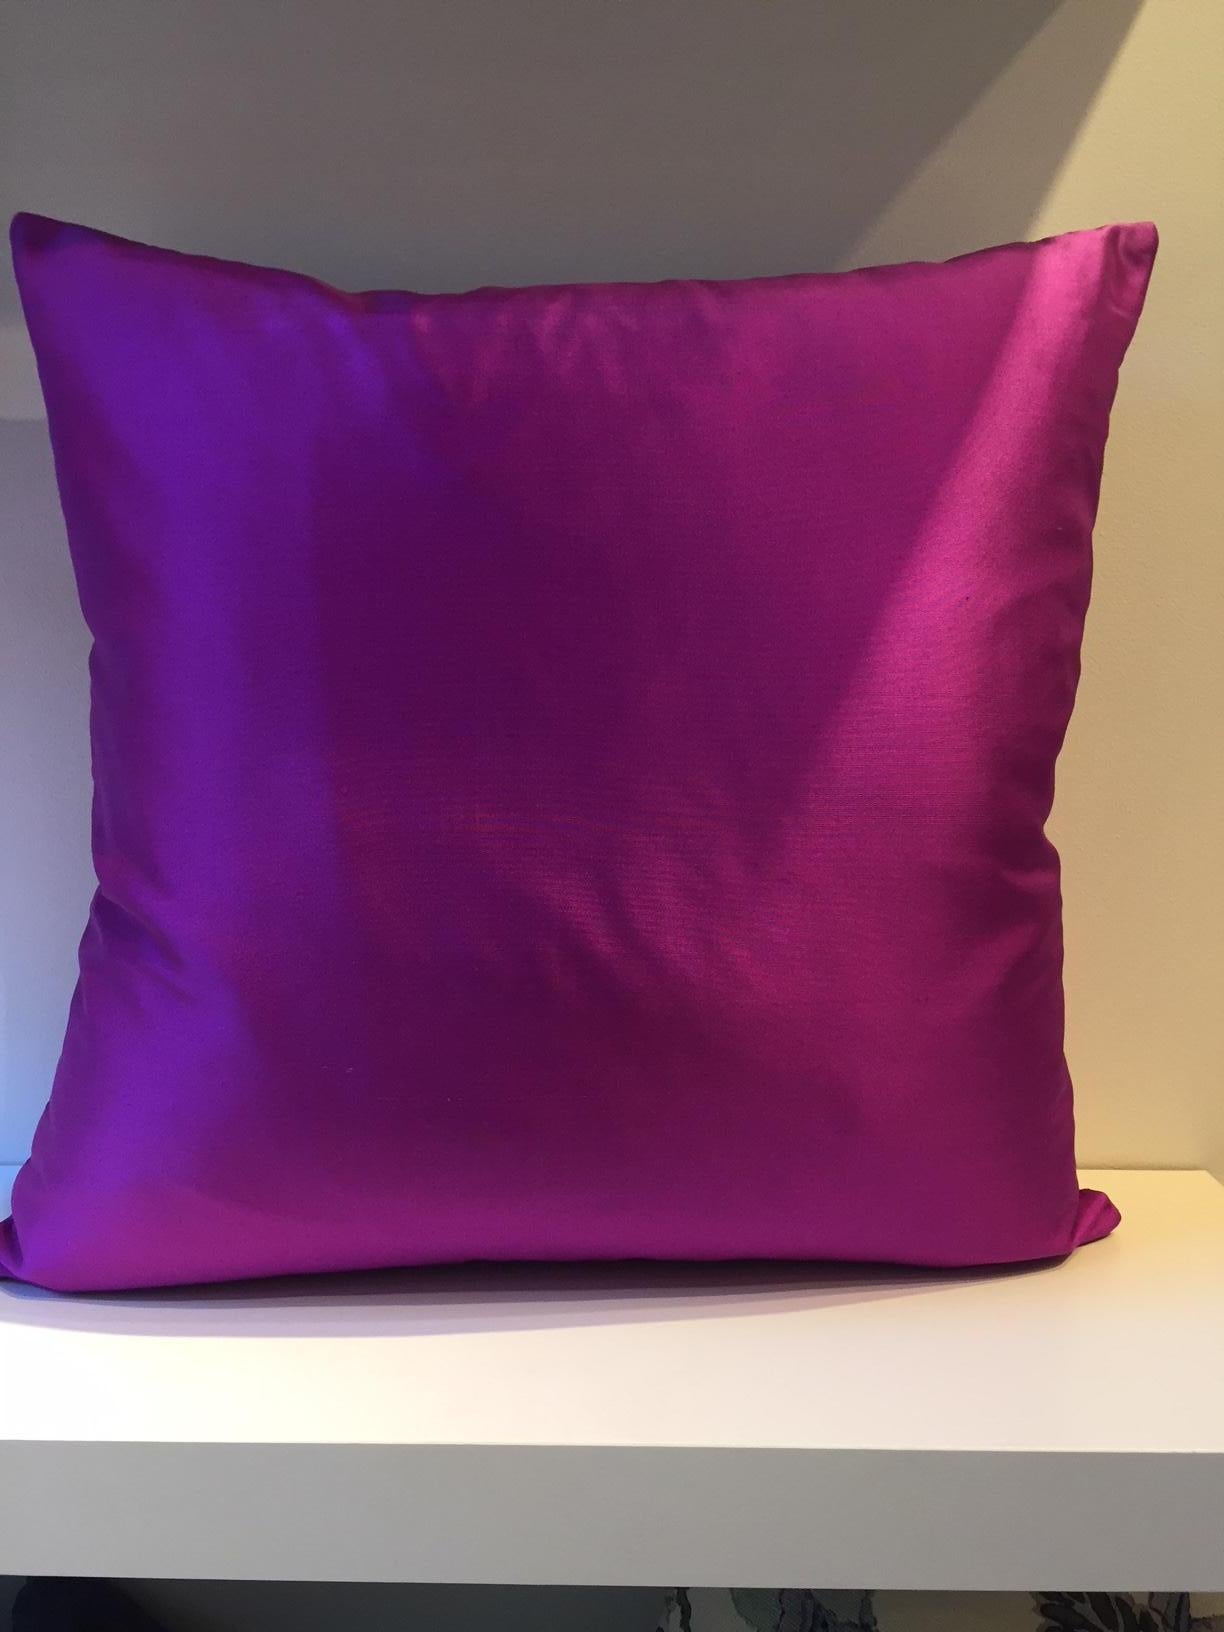 Decorative cushion: taffeta silk fabric, color orchid with embossed front panel in steam pleated fish scale pattern, back panel plain silk taffeta, 50 x 50 cm, concealed zipper in the bottom seam, cotton lining, feather inner pad,
1 no cushion